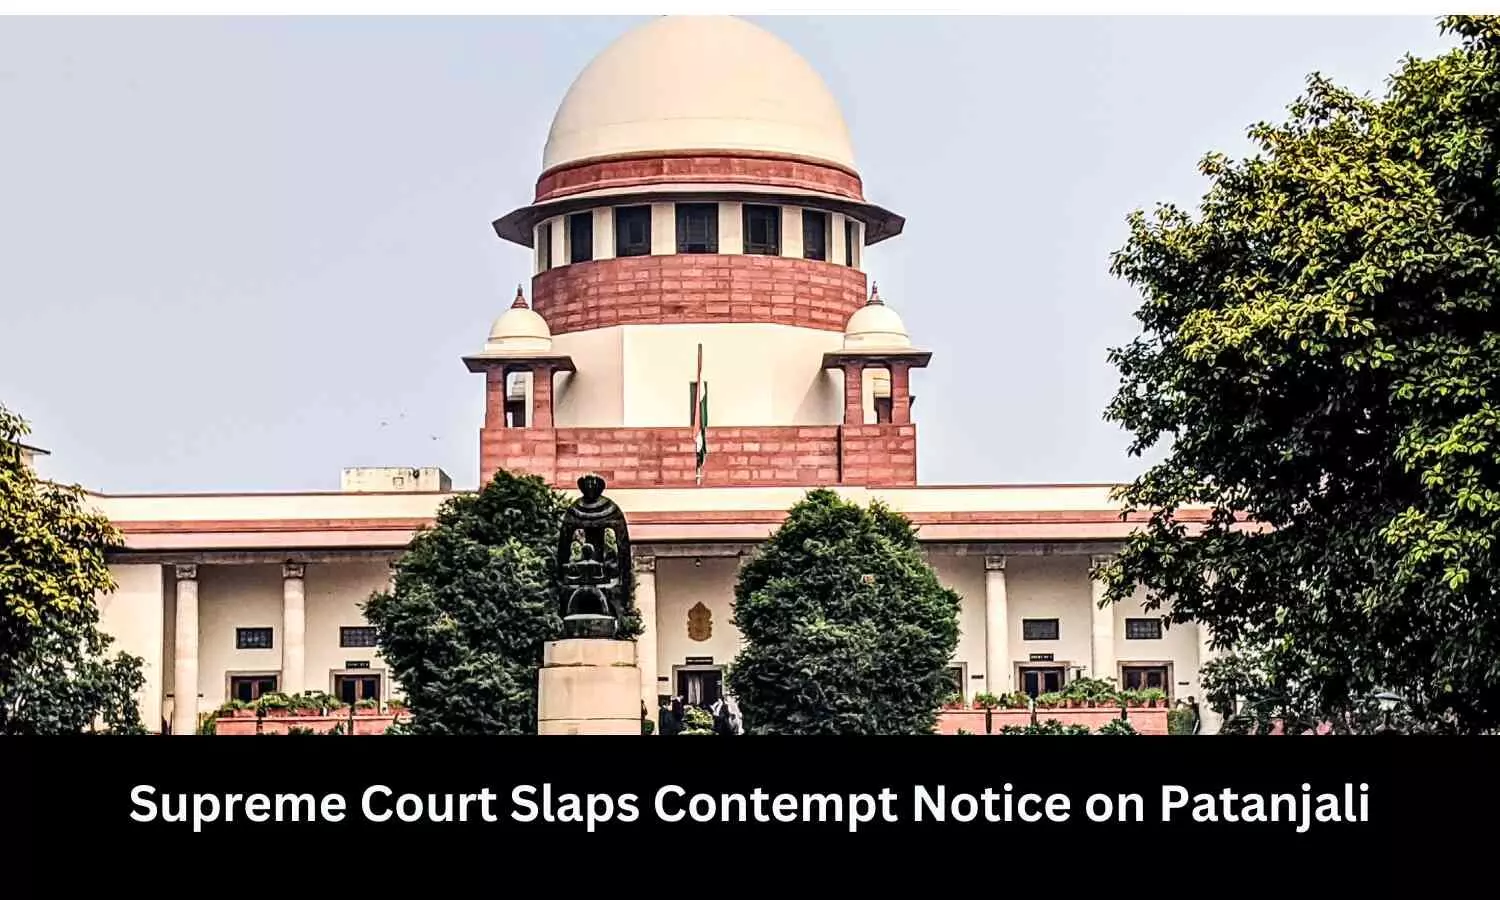 SC issues contempt notice to Patanjali Ayurved, its MD over misleading ads